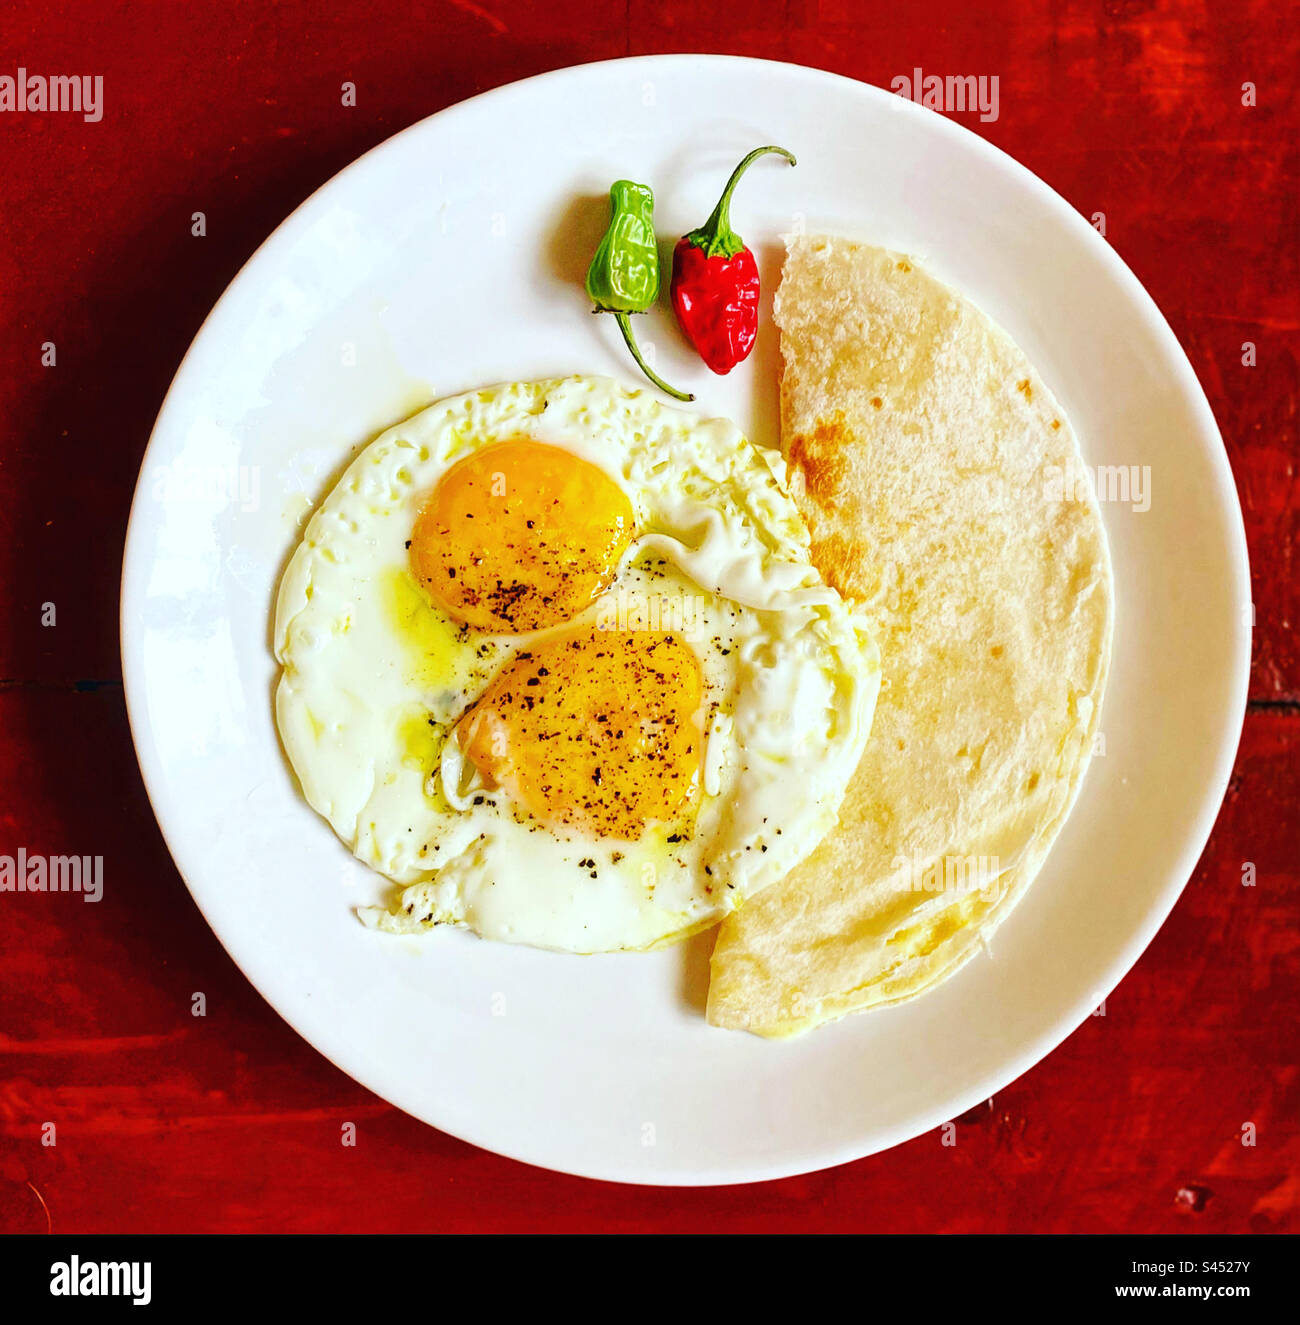 Two fried eggs, a cheese quesadilla and a chile green and red for breakfast in Queretaro, Mexico Stock Photo